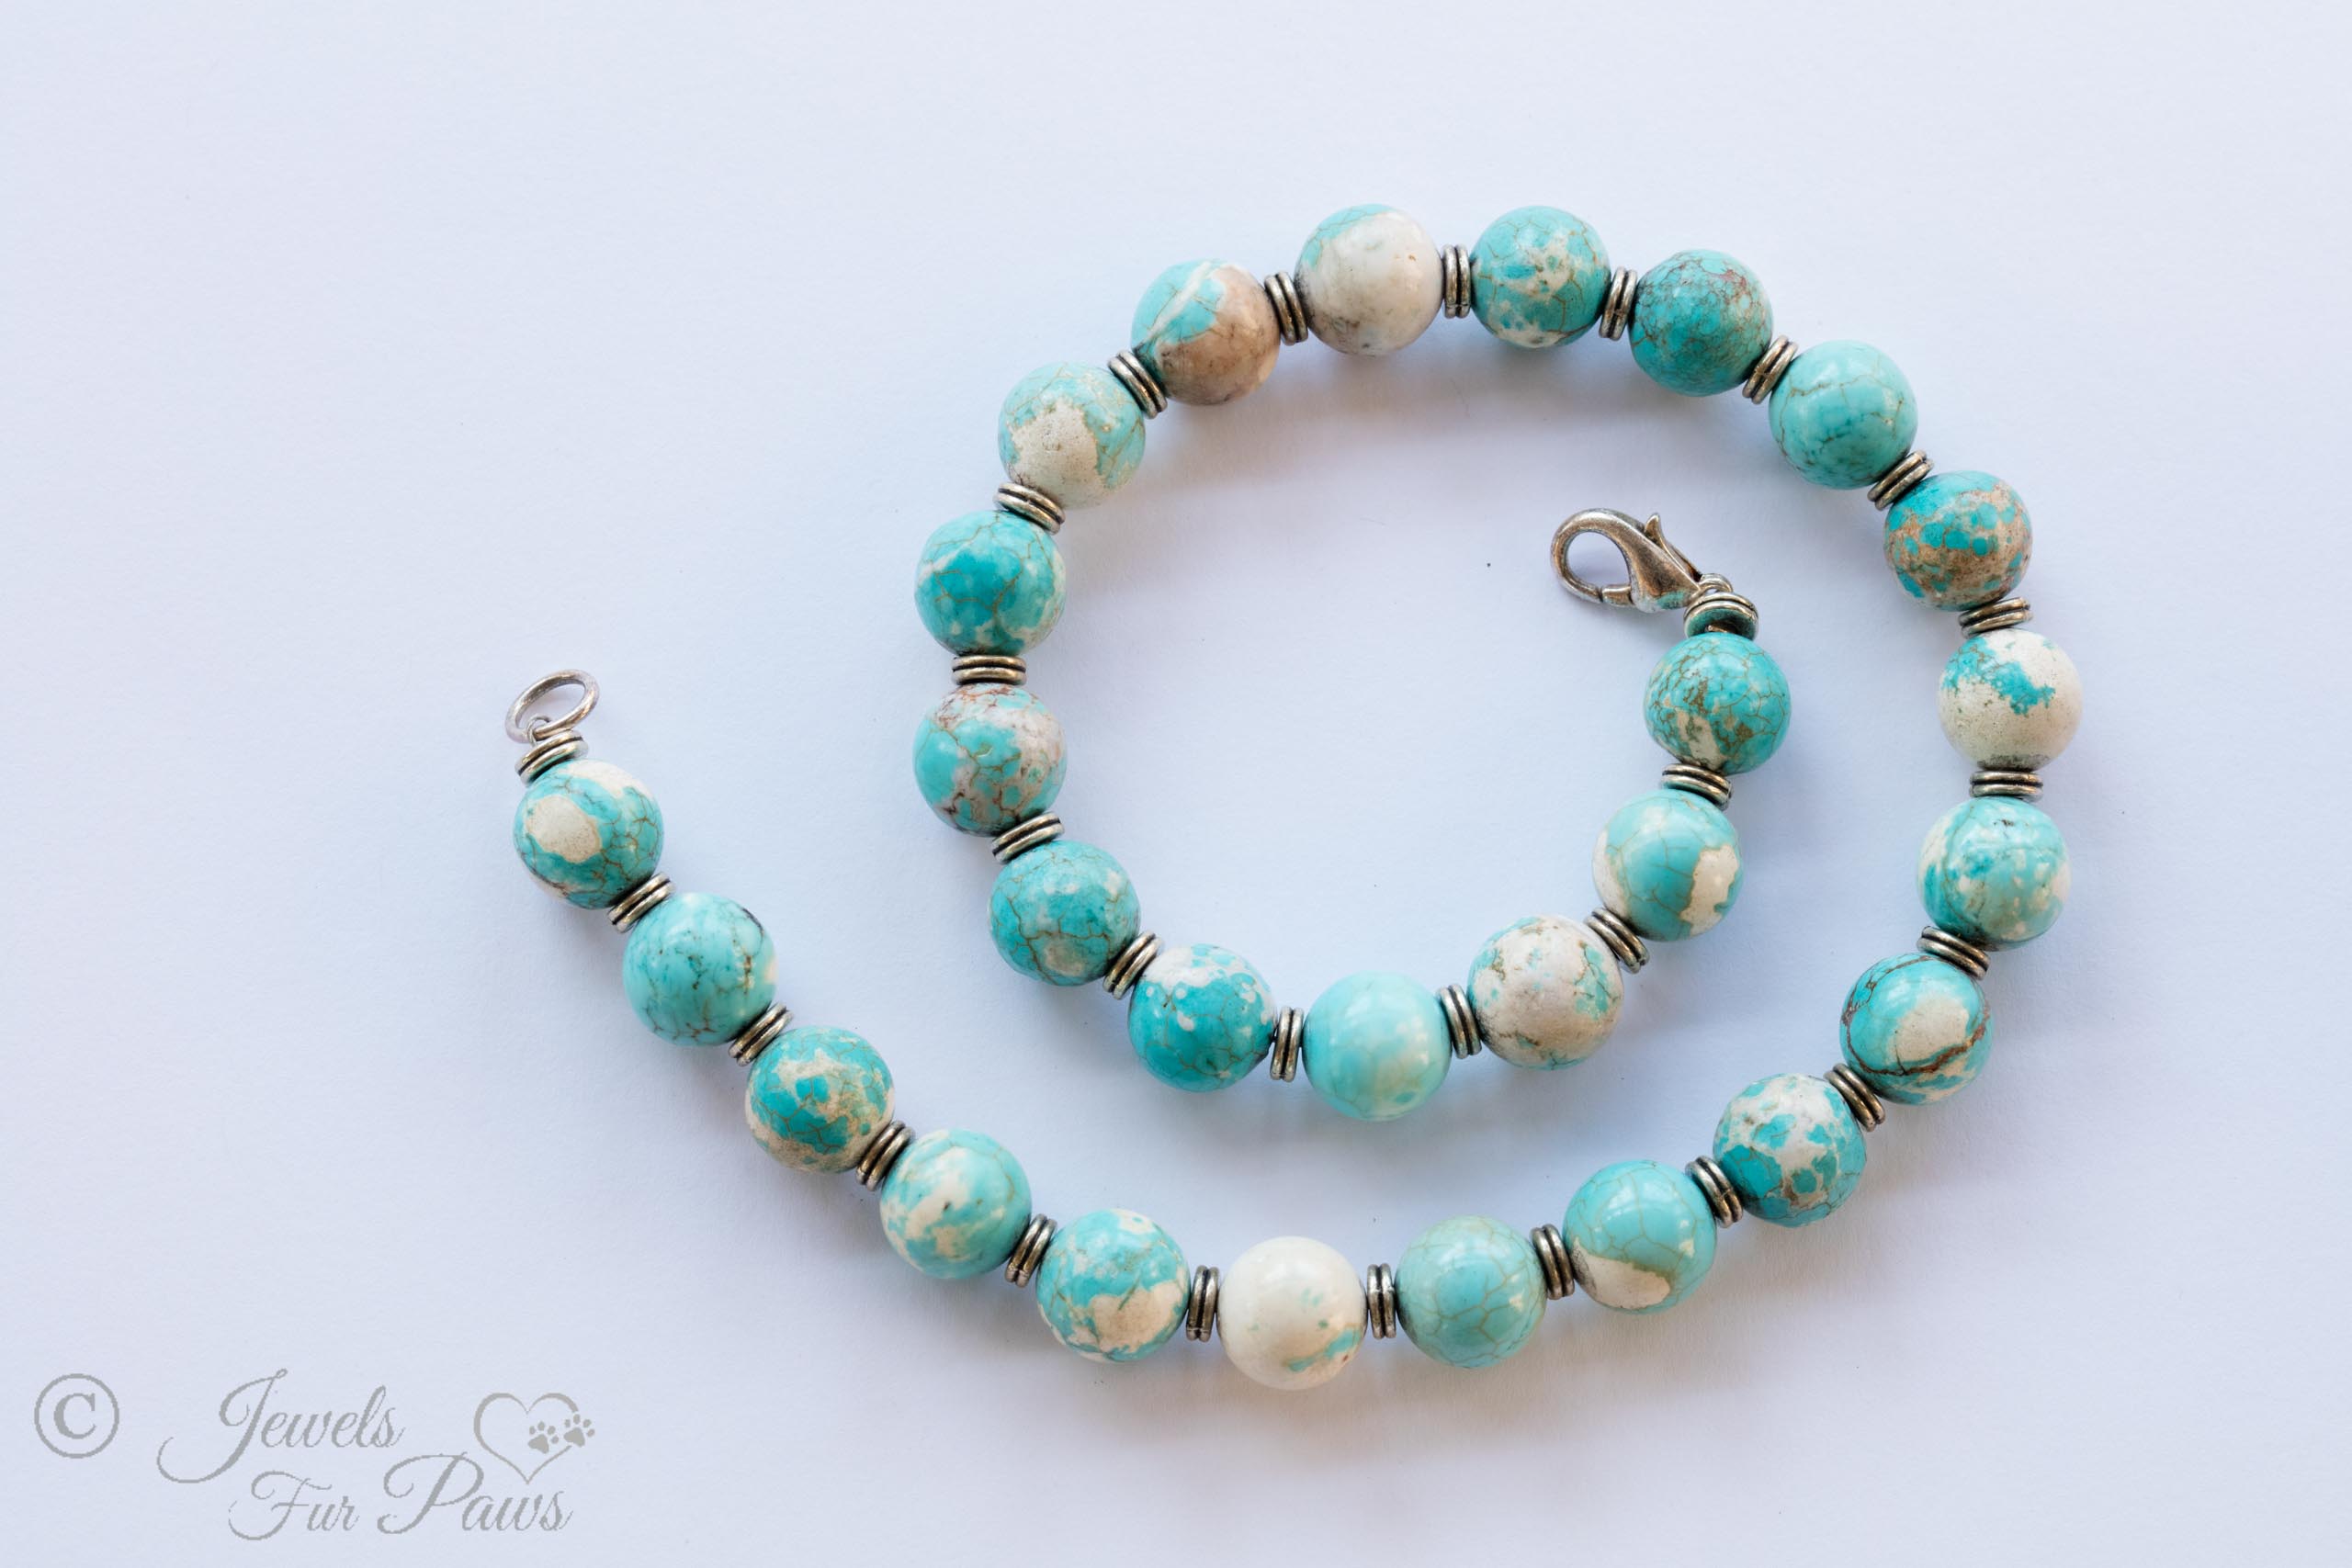 tumbled turquoise beads with silver spacers medium dog necklace on white background